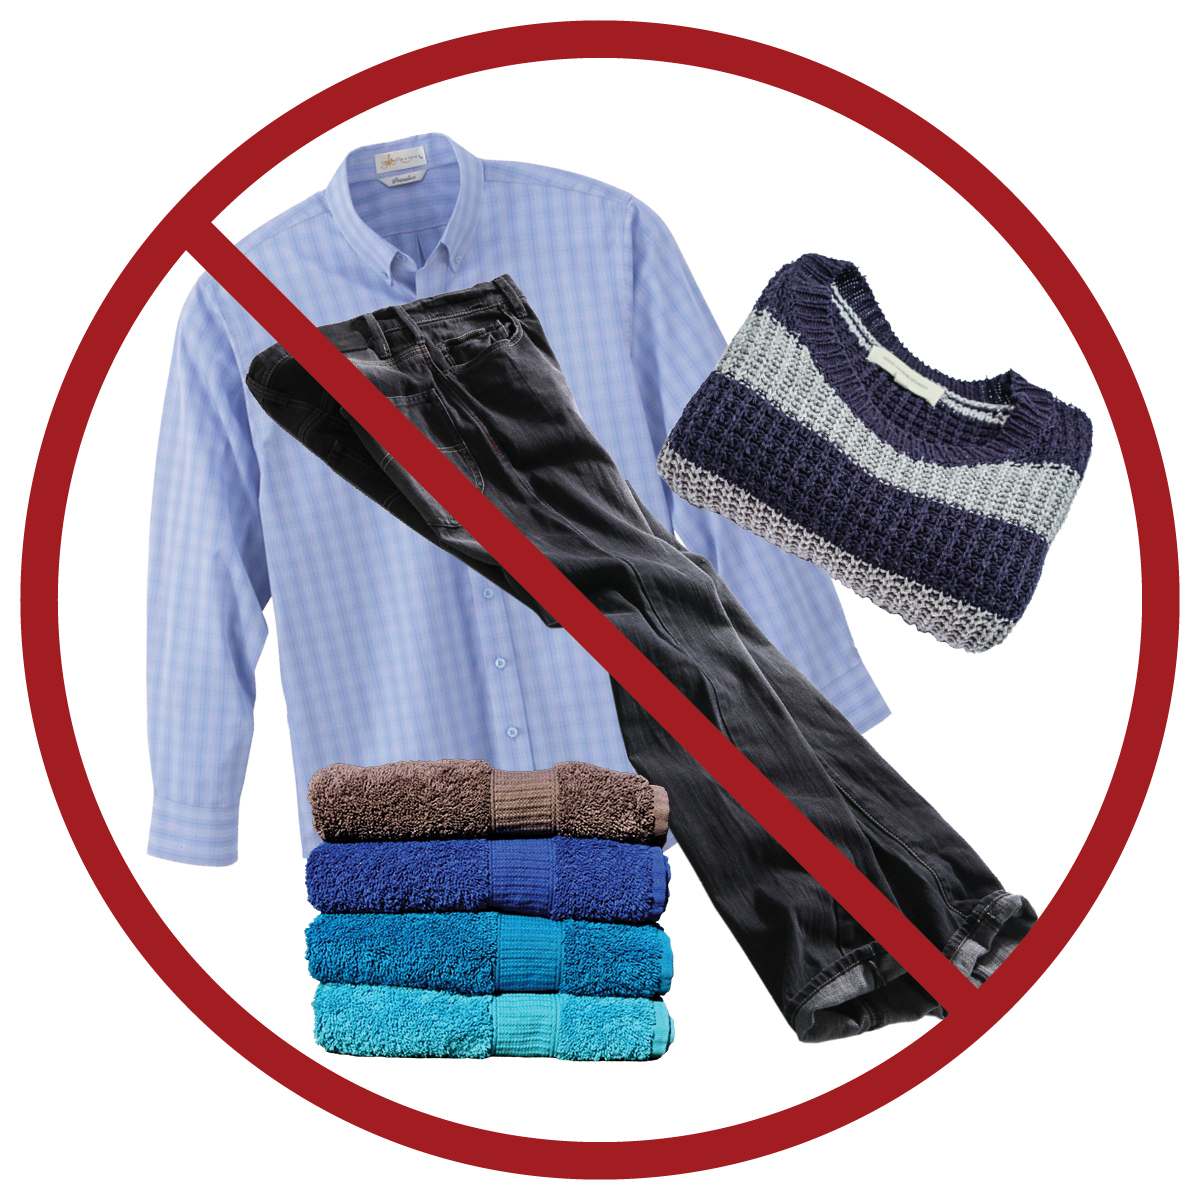 clothing and textiles: keep out of blue recycling cart